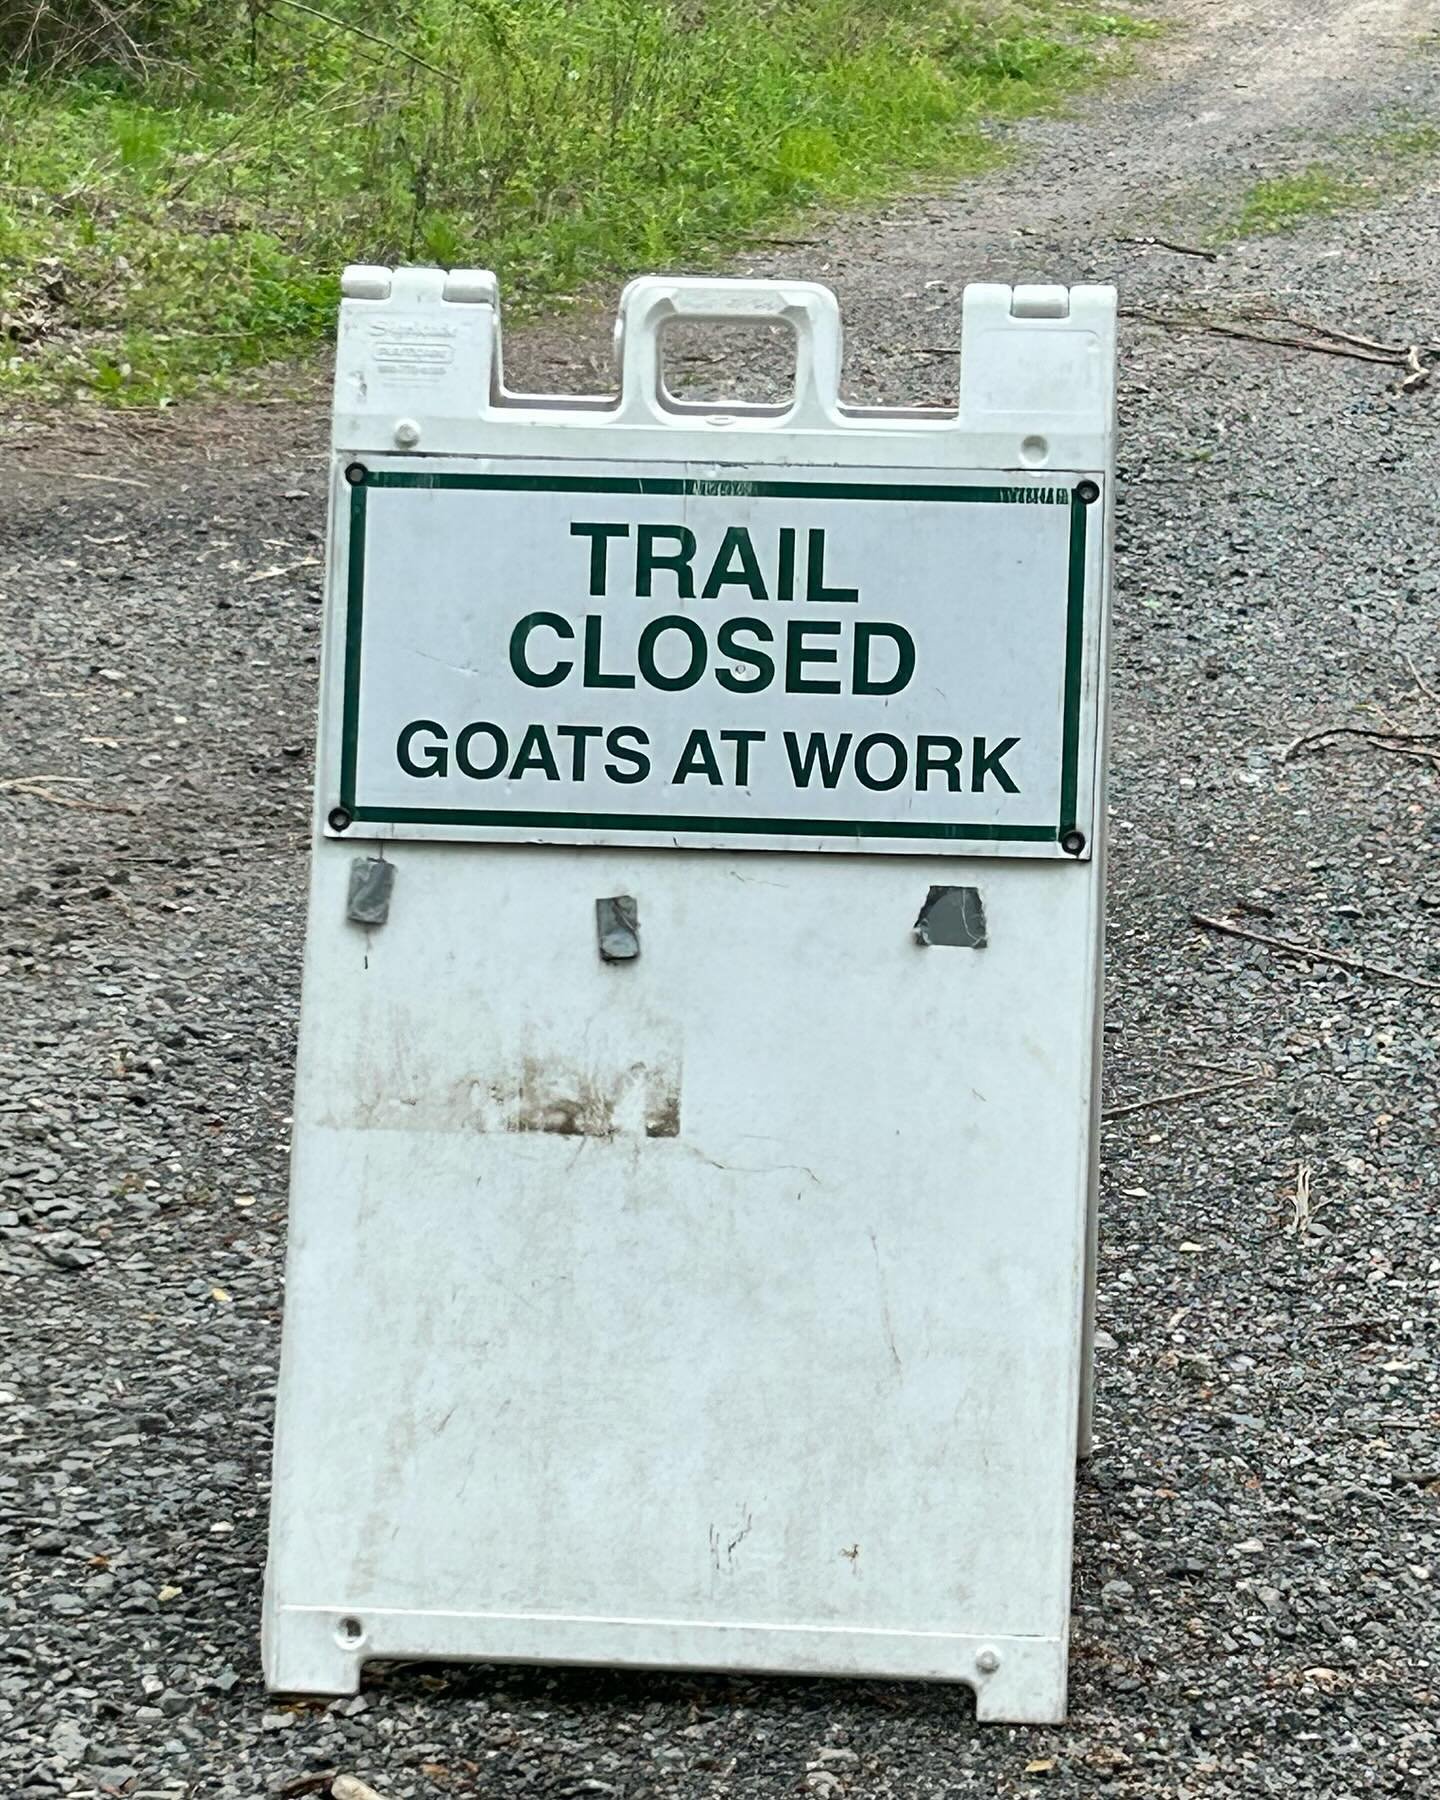 My morning zoom cancelled and awaiting funds on a project before I work. So took myself for early morning hike and ran into this. Essential question &hellip;. Are they union or nonunion? 😅😂 #fridayfunny #weekendvibes #hiking @rockefellerstatepark #